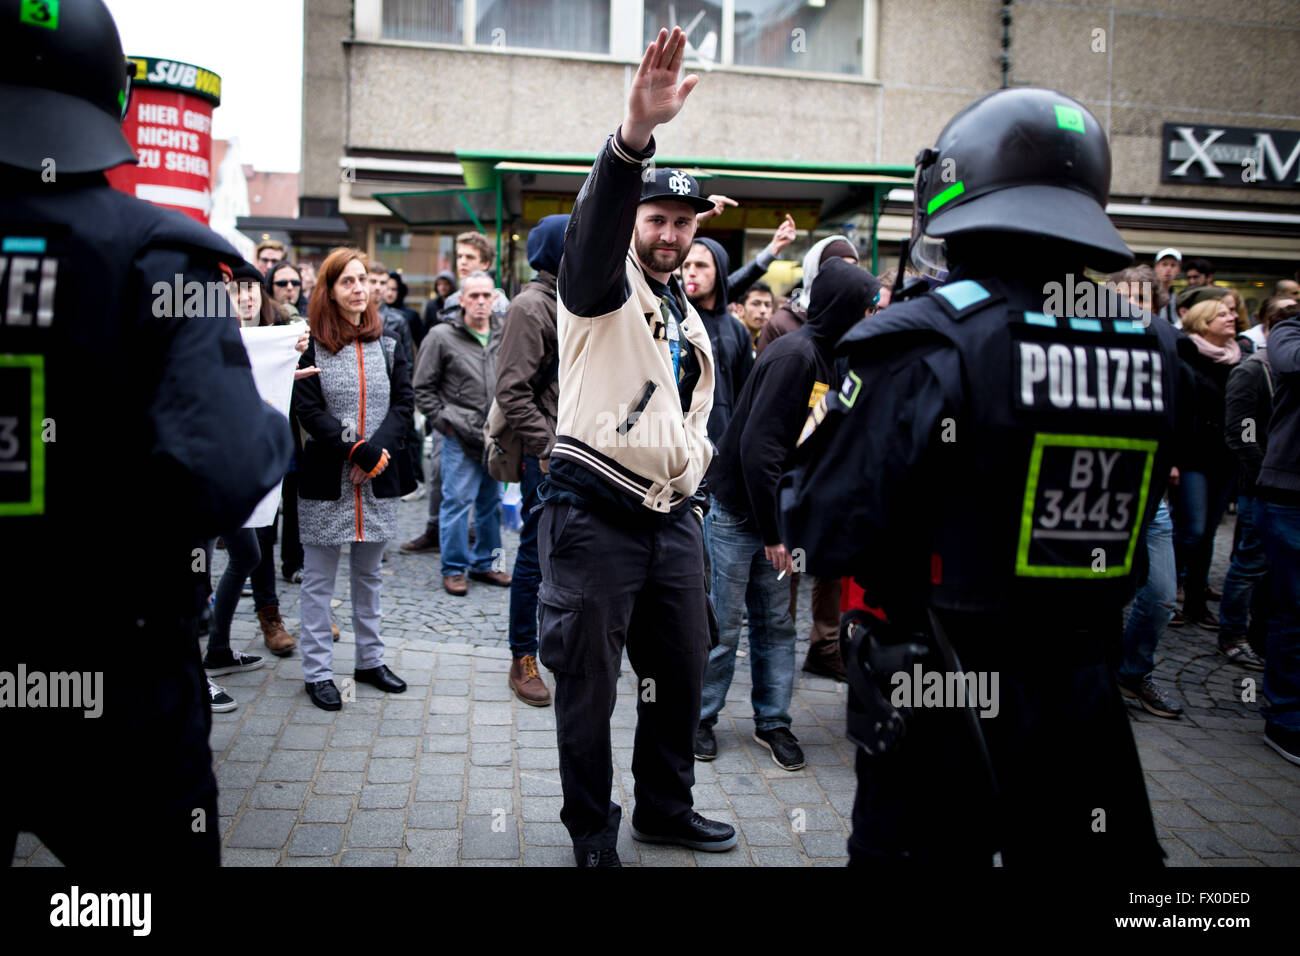 Neonazi party III. Weg rallied through Ingolstadt today. Approximately 70 neonazis demonstrated through the Bavarian town. Counter protestors blocked the route twice. 9th Apr, 2016. © 24mmjournalism/ZUMA Wire/Alamy Live News Stock Photo